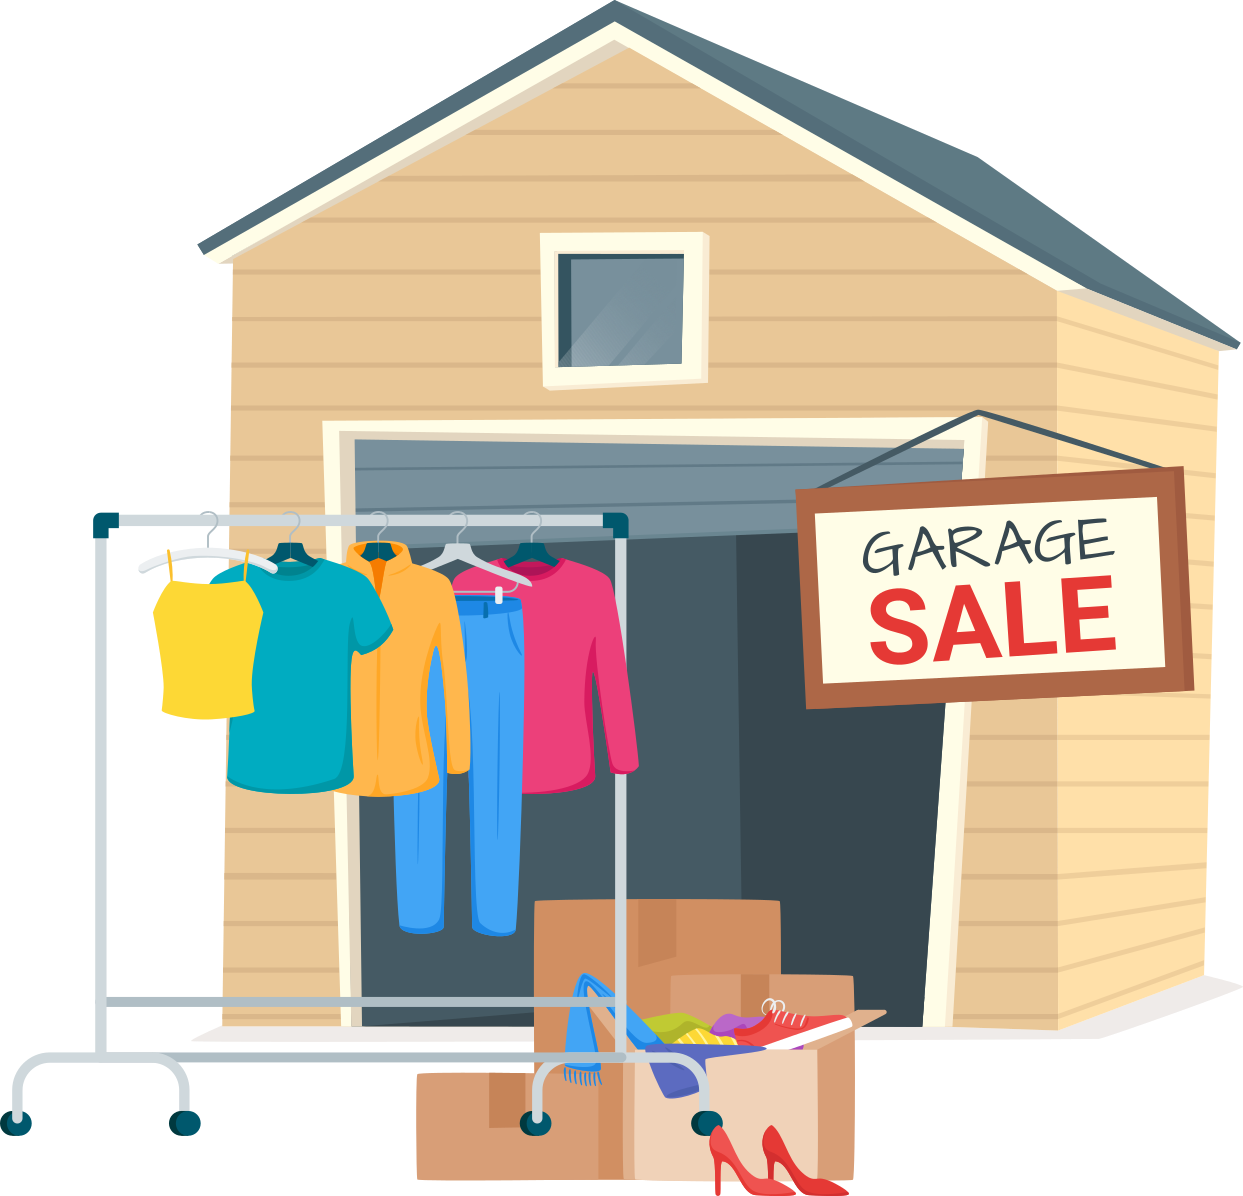 Garage with clothes hanging outside - garage sale concept